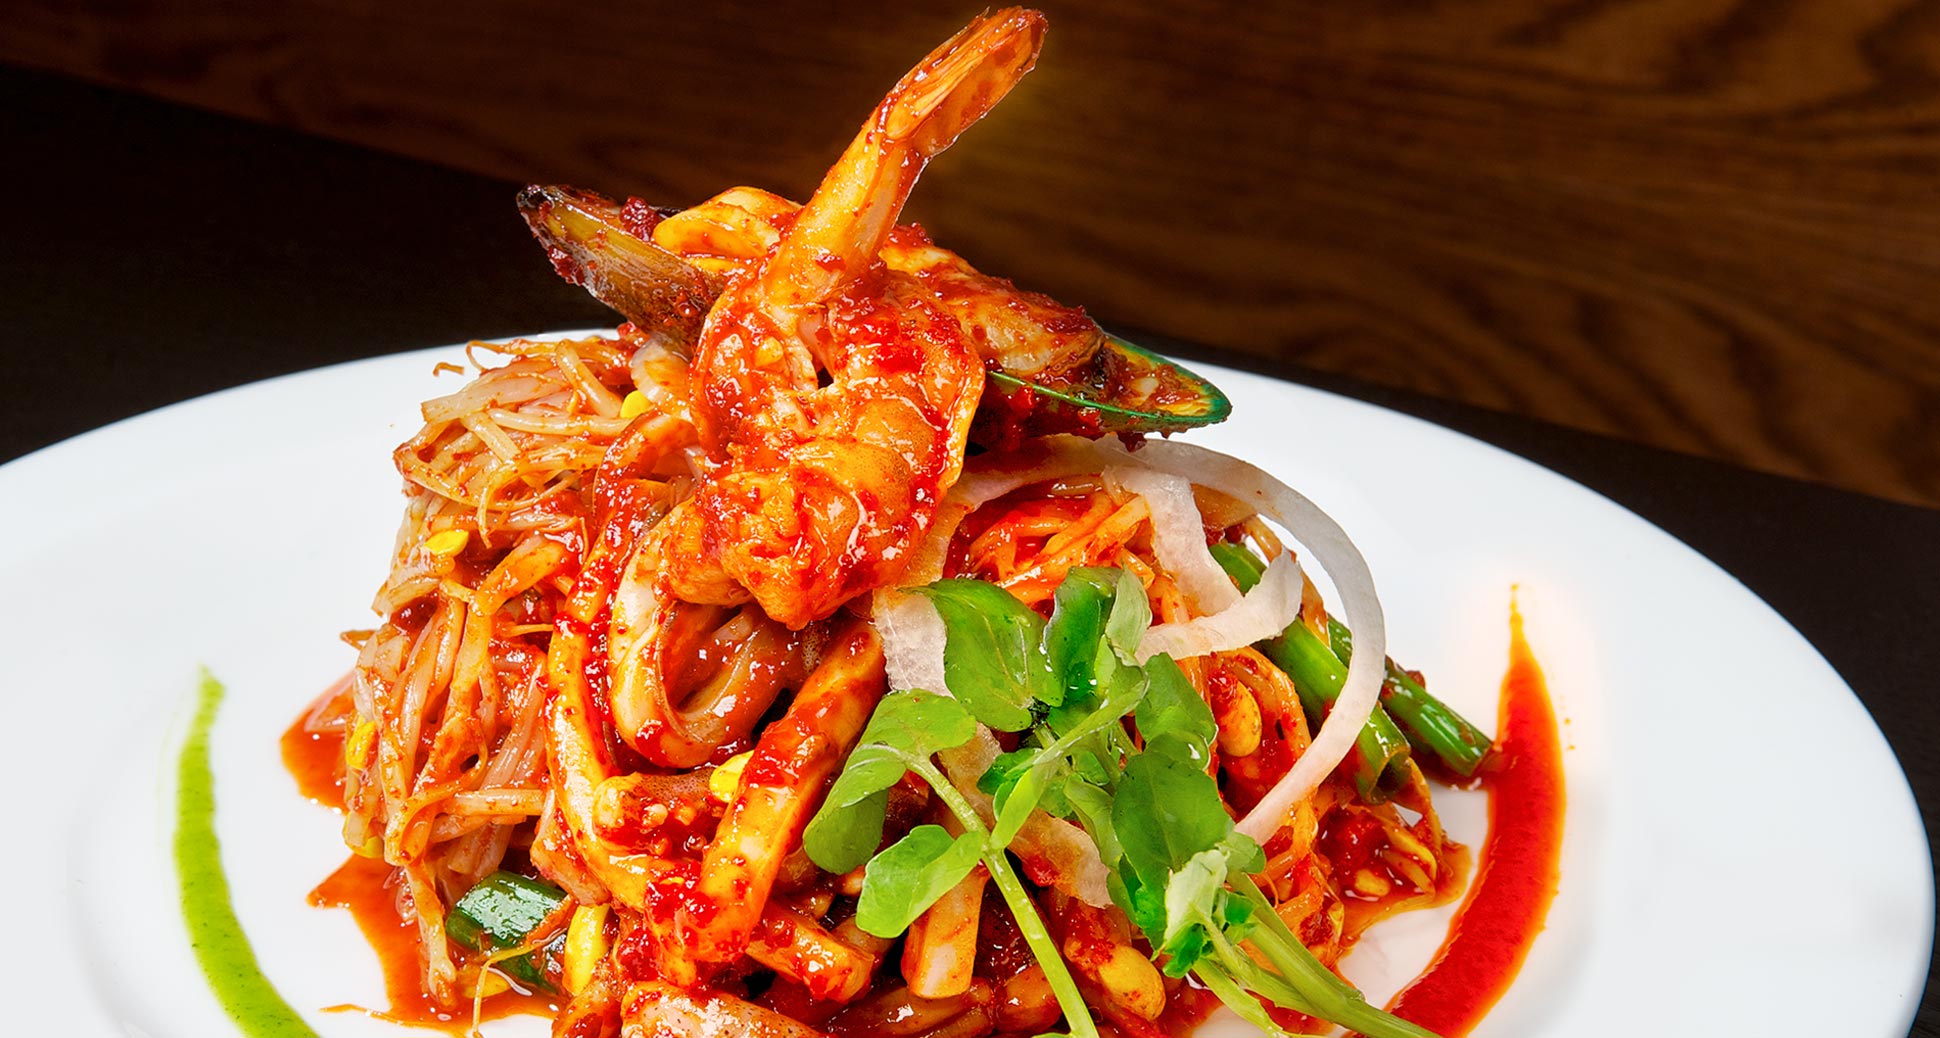 House special spicy seafood: tasty way to combat the summer heat